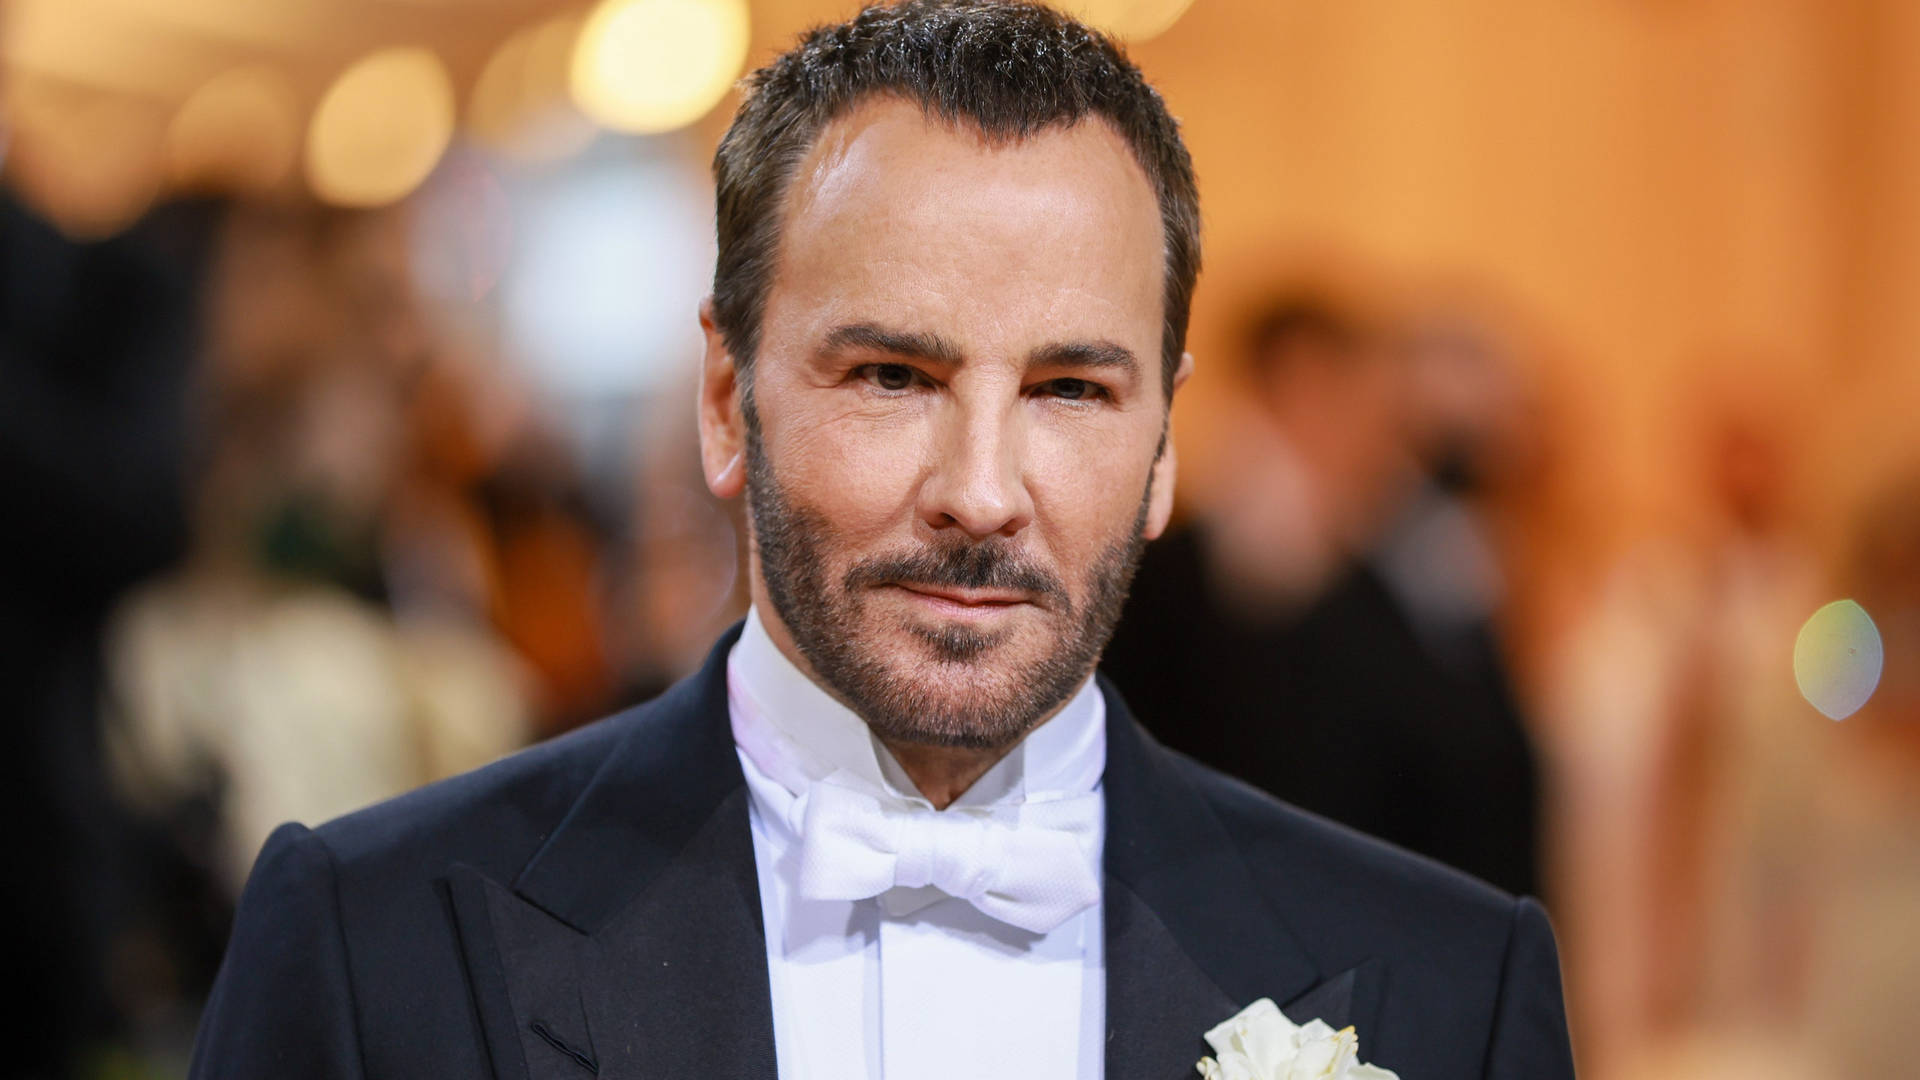 Tom Ford With White Bowtie Background